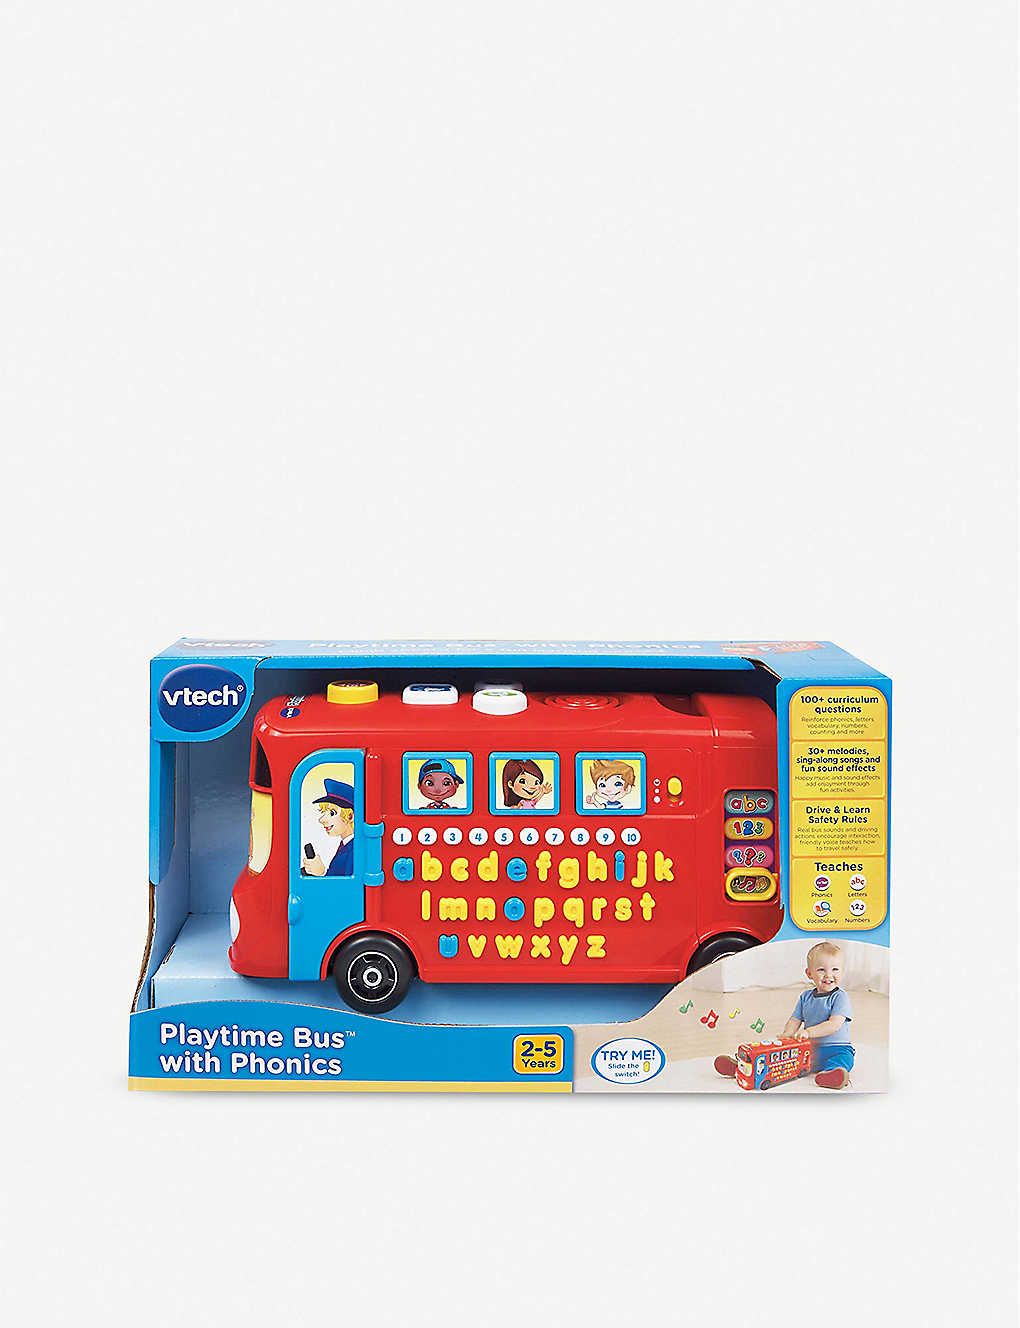 VTech 150003 Playtime Bus Educational Playset for sale online 